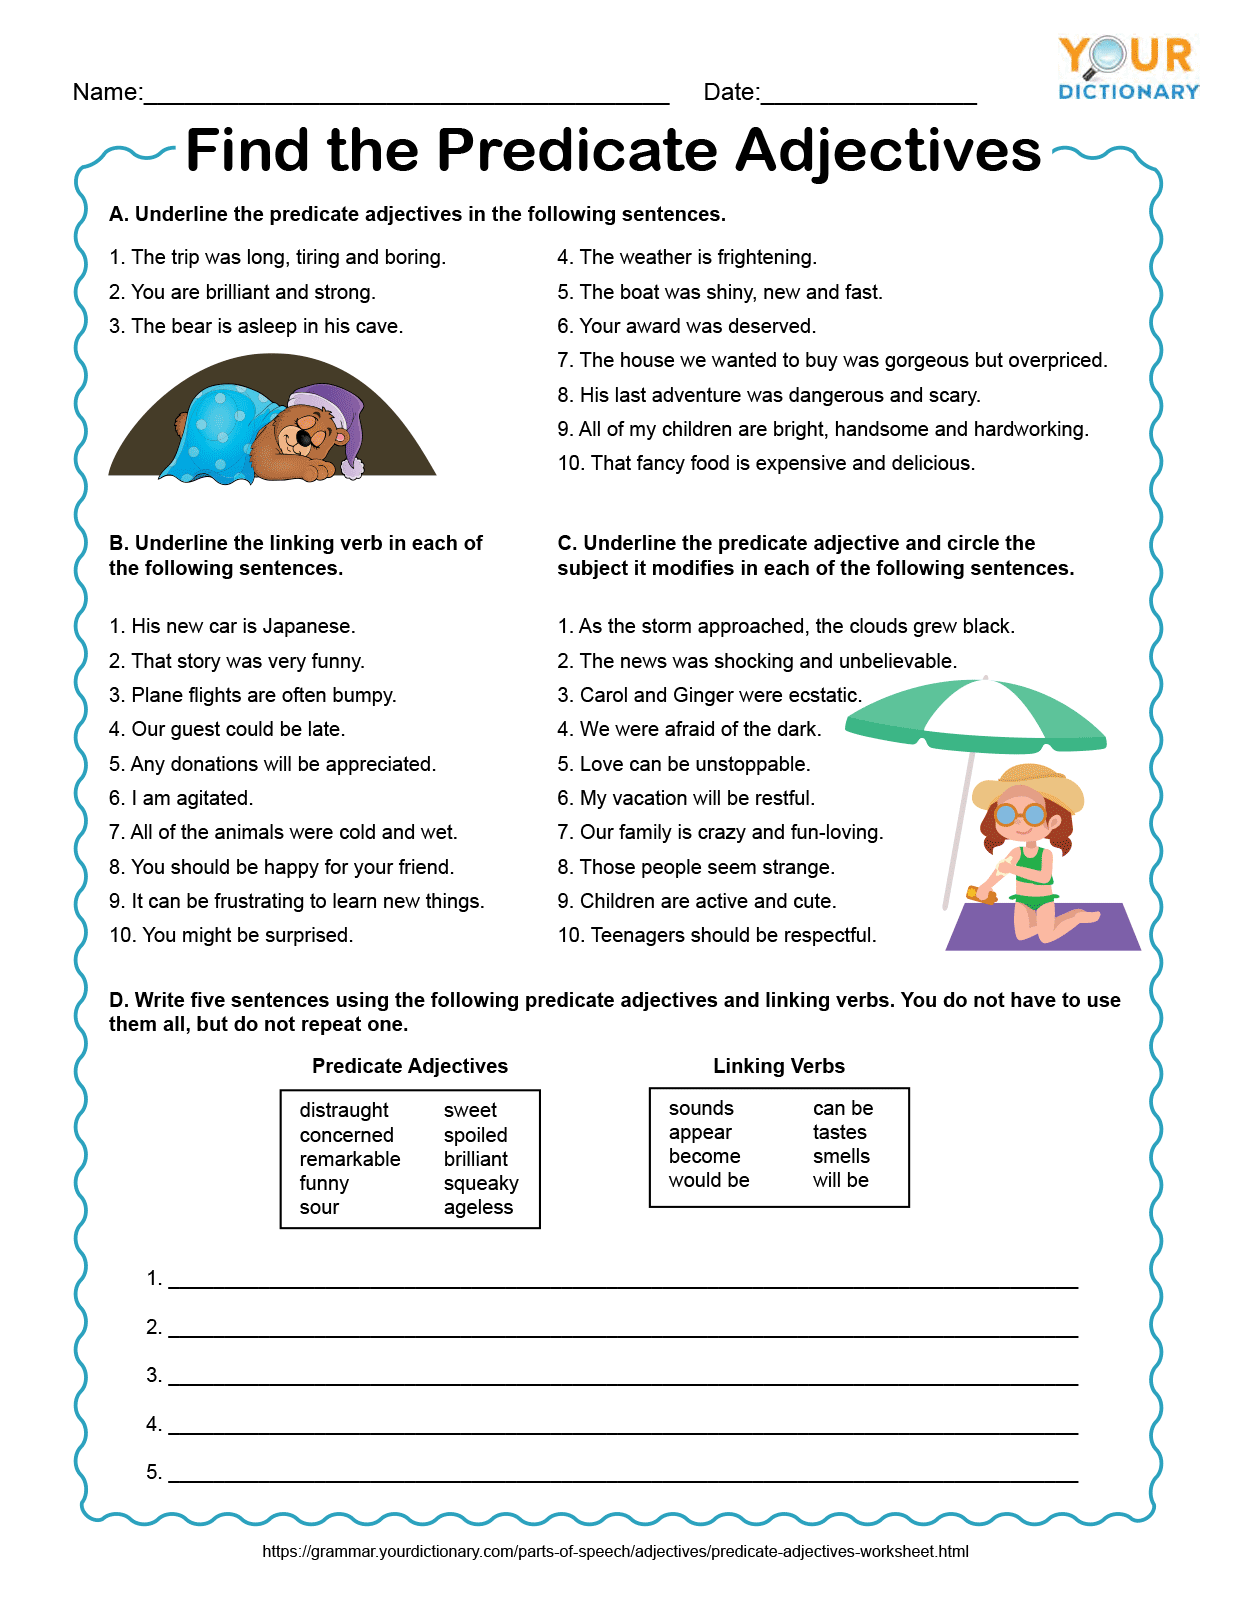 Adjectives And Adverbs With Magical Horses Worksheet Answers Adverbs Images